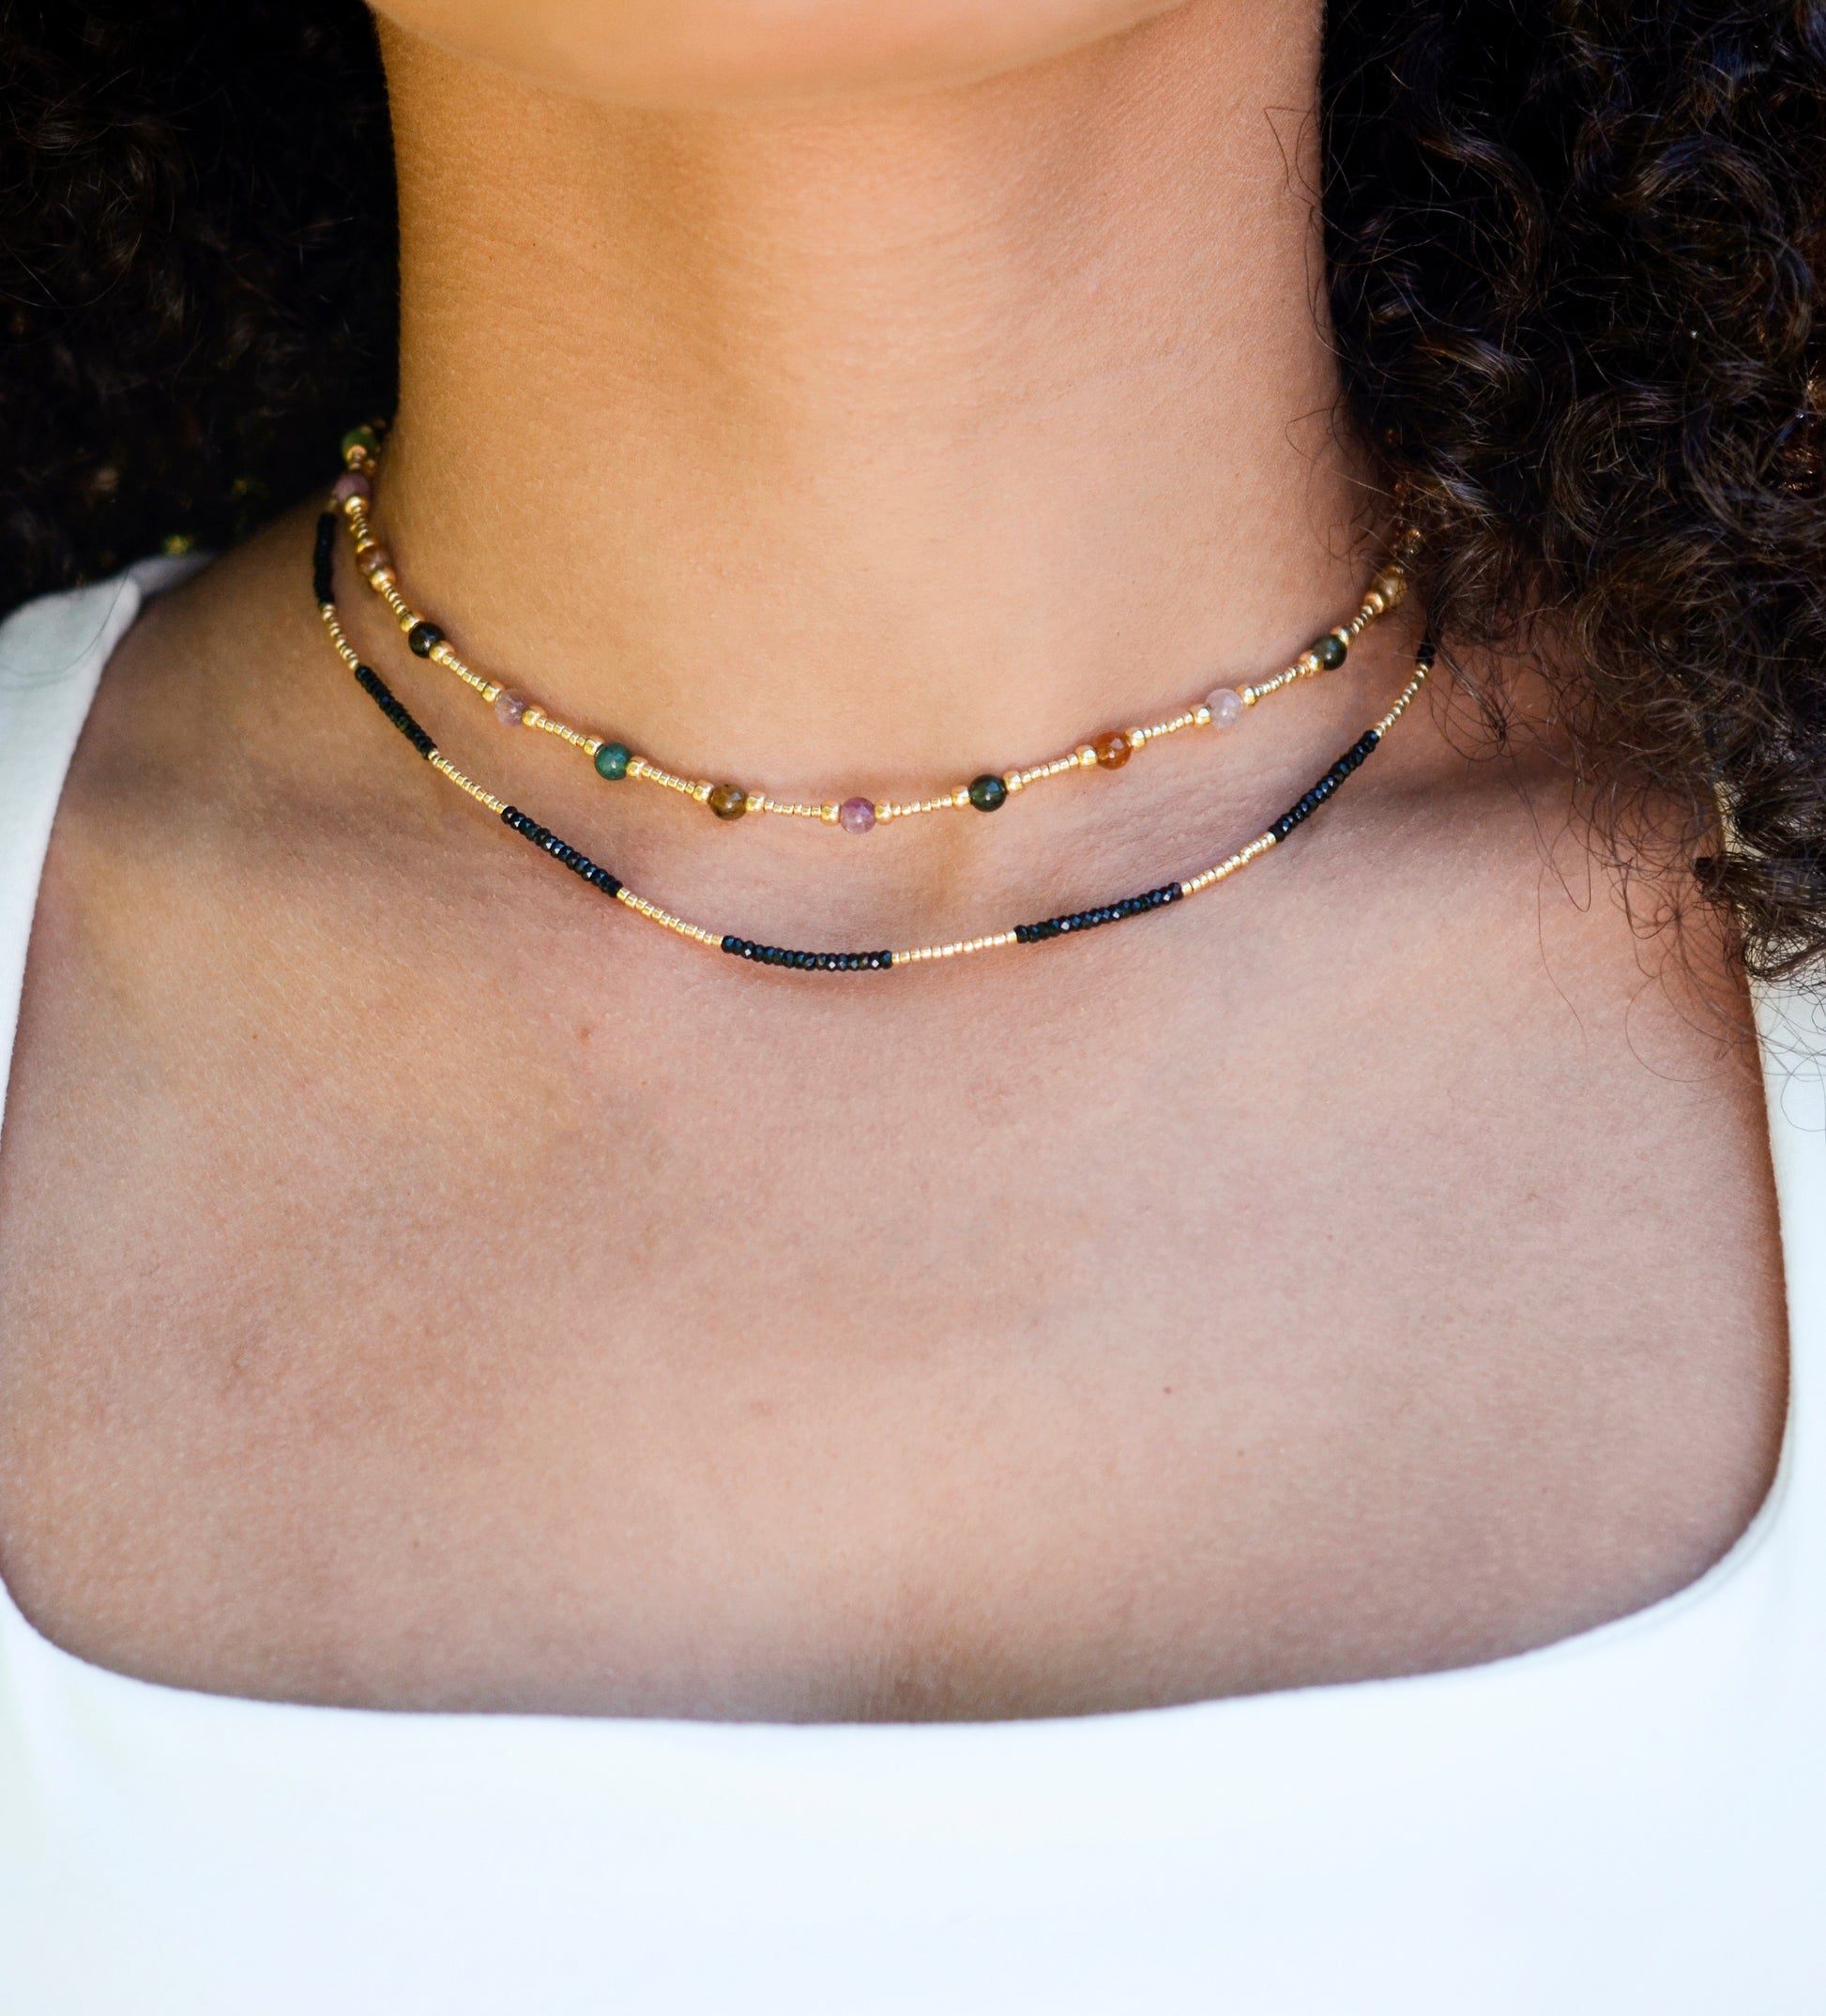 Multicolored, smooth polished Tourmaline gems hand-beaded with gold plated glass beads. Colors range from pink, green, brown, yellow, or black. Modeled image. Modeled with a black onyx beaded necklace.